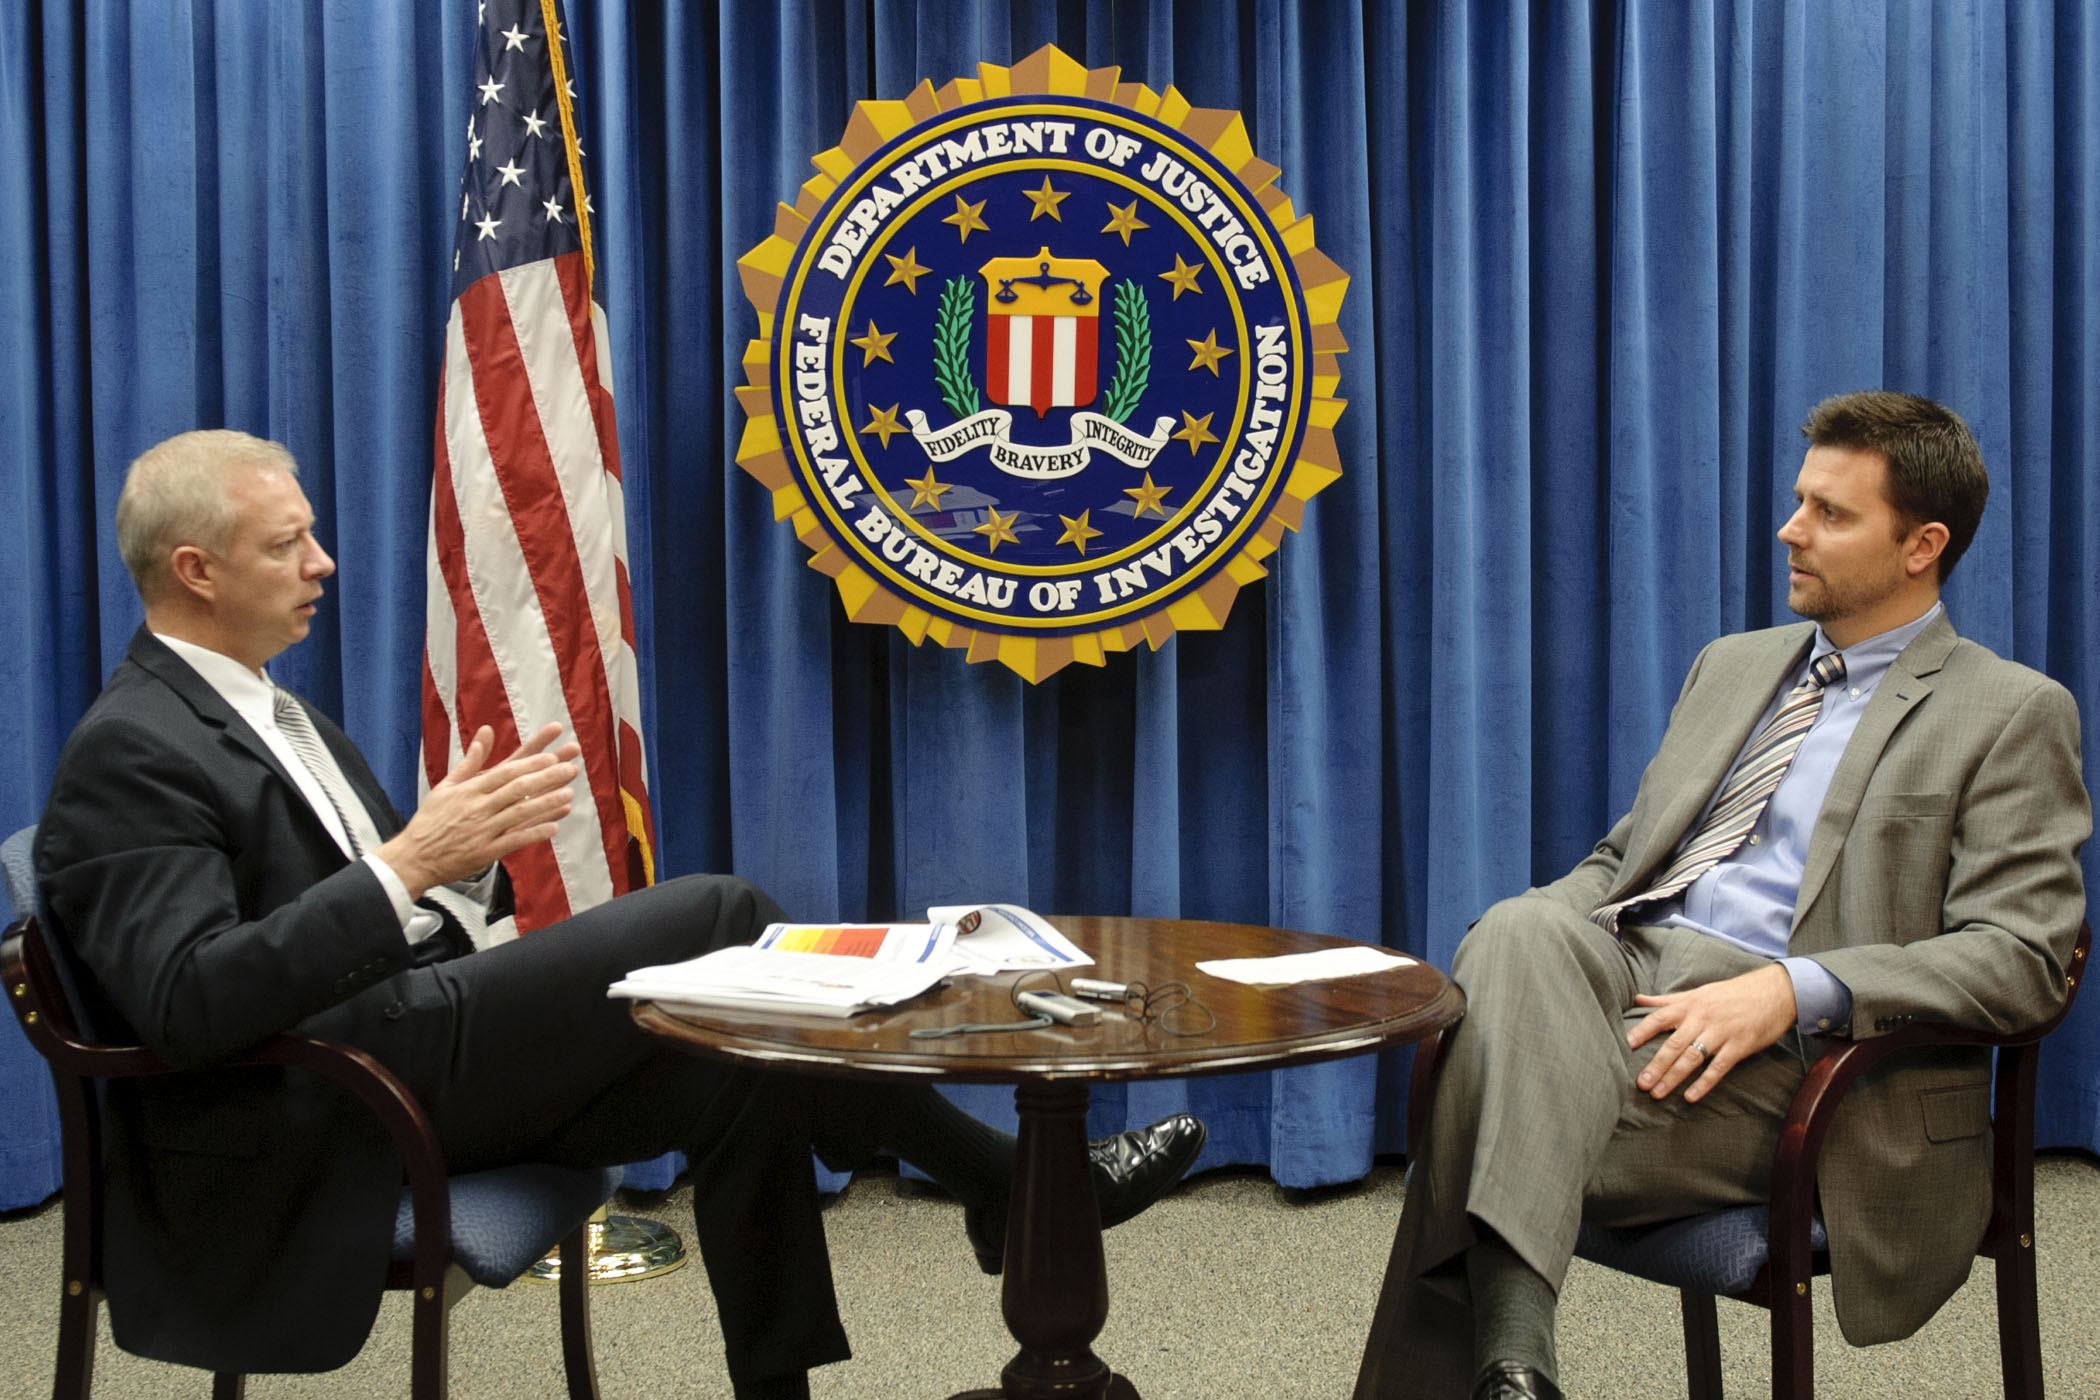 Pamplin alumnus and FBI assistant director Gordon Snow and Wade Baker, director of risk intelligence at Verizon and a Pamplin doctoral student, discuss cybersecurity topics.